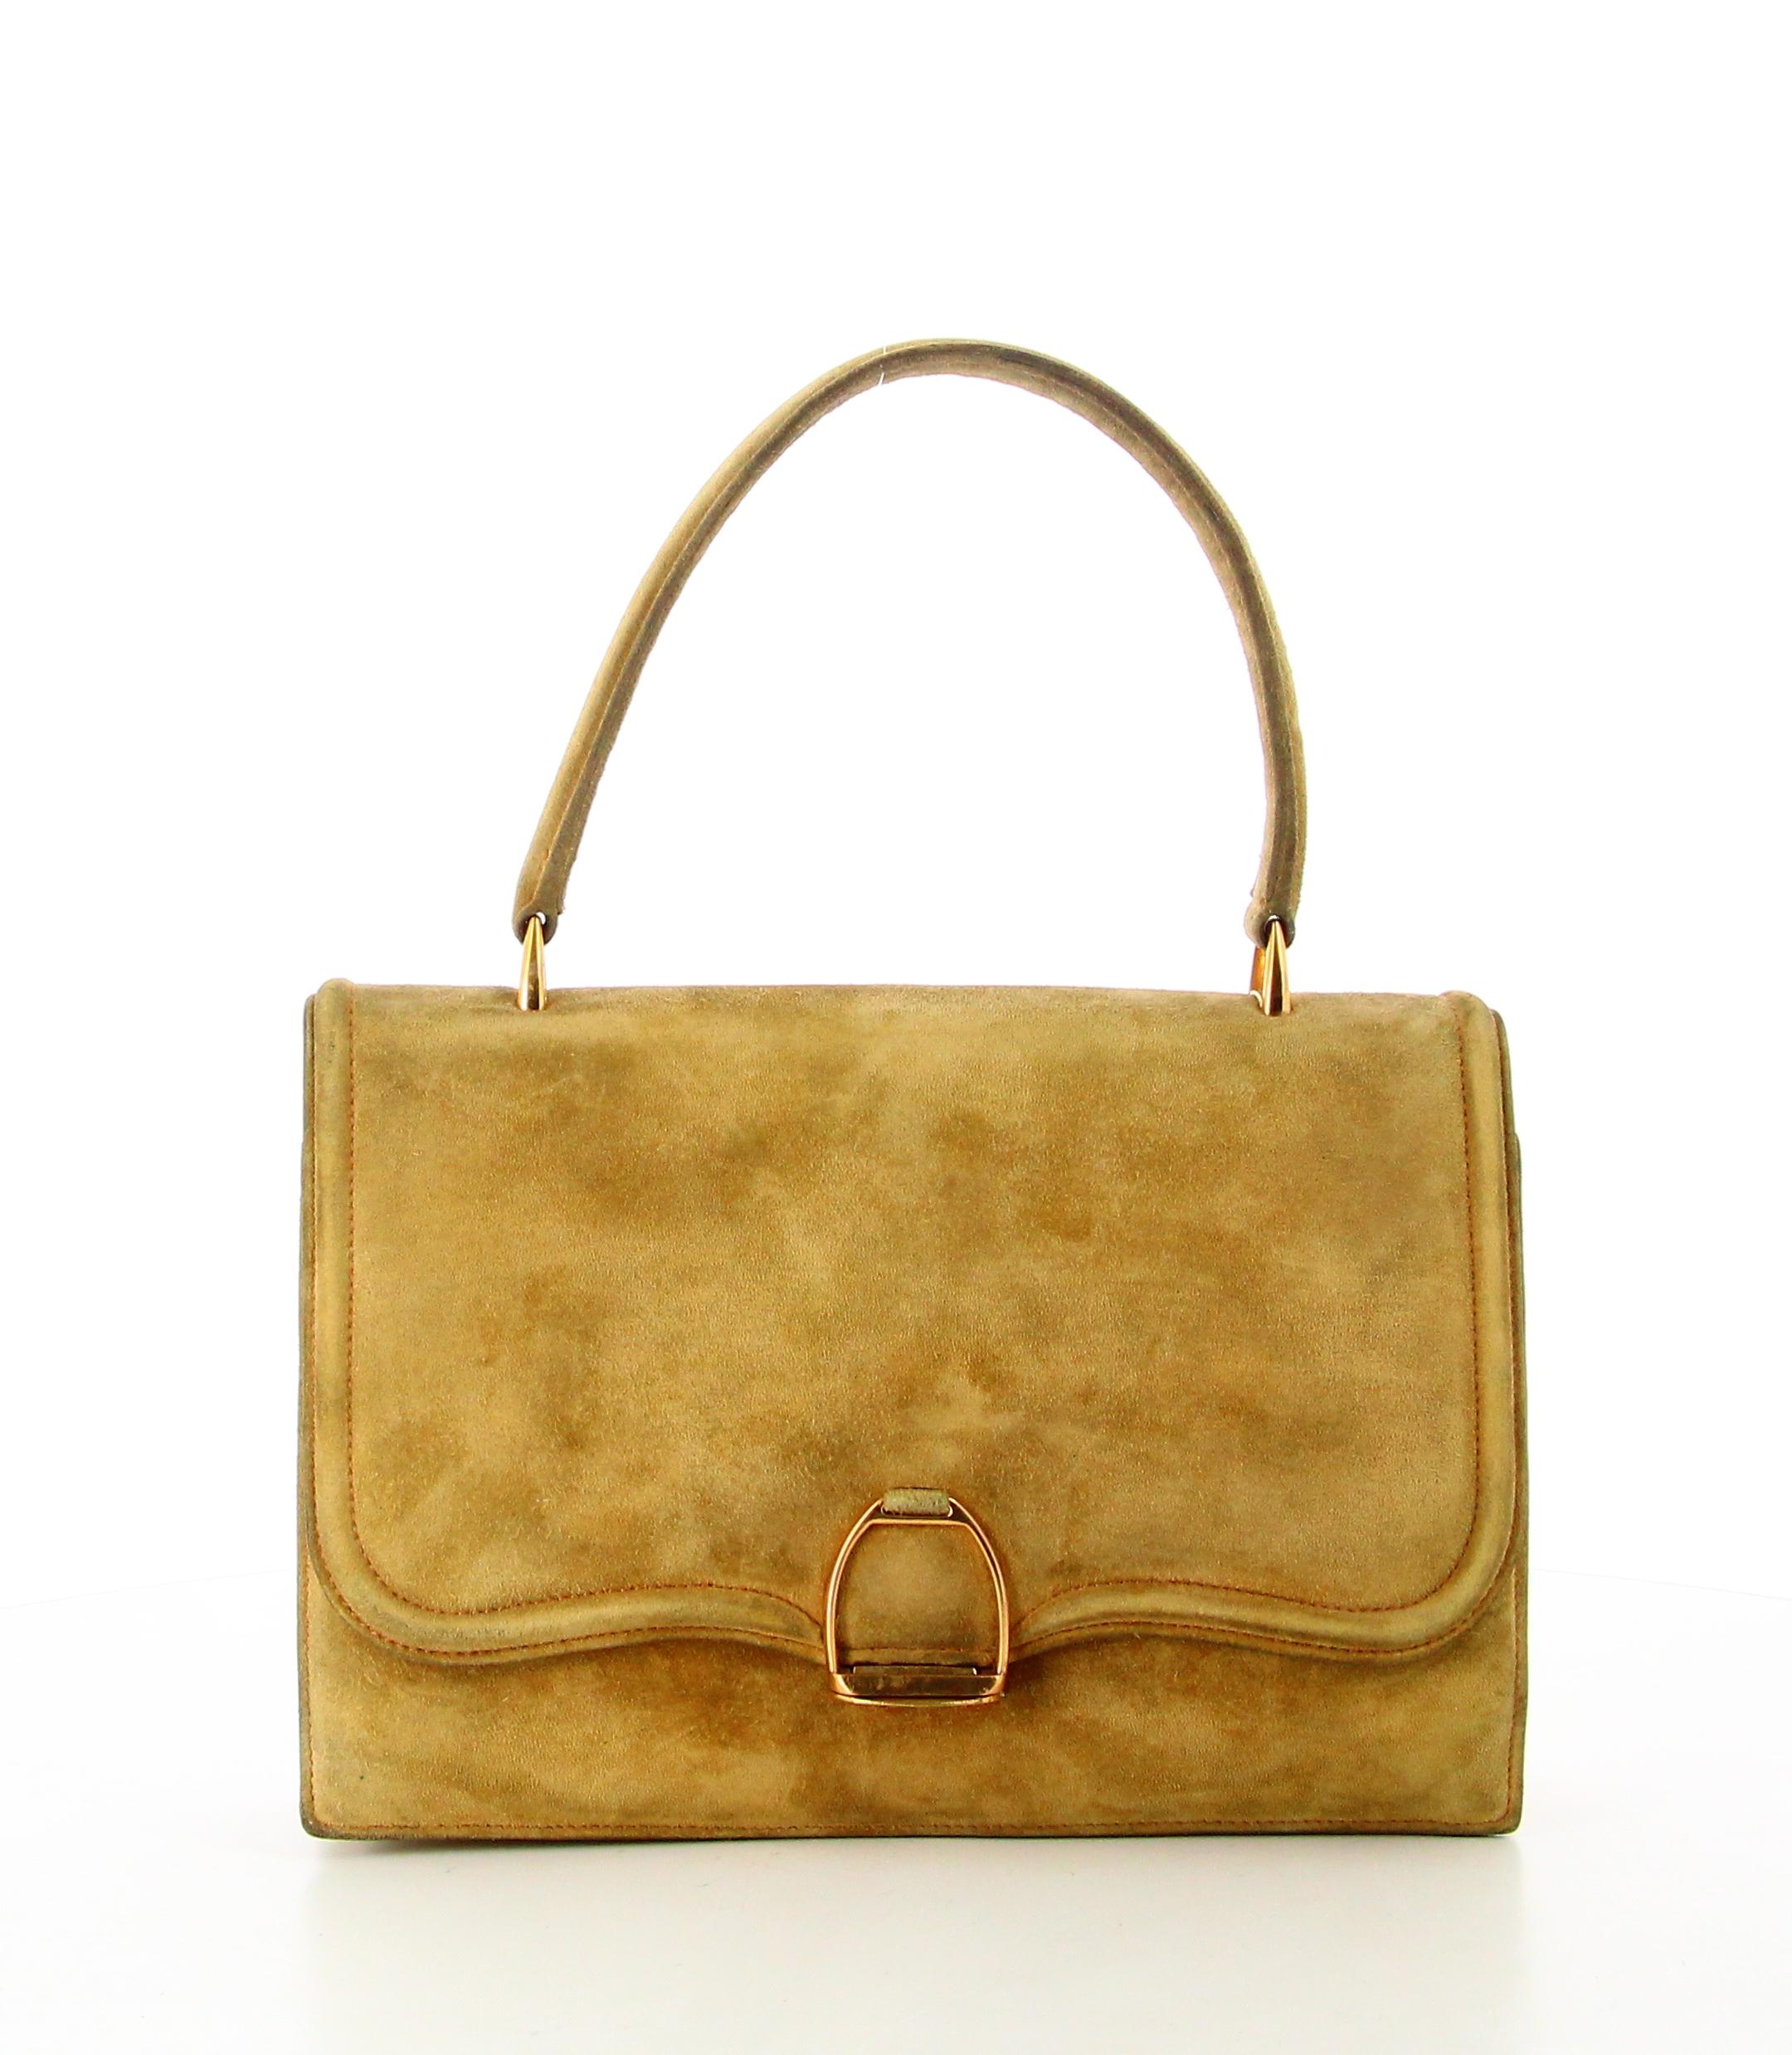 Hermes 60's Calfskin Doblis handbag

- Good condition. Shows signs of wear over time.
- Hermes handbag 
- Calf leather 
- beige 
- Small strap 
- Clasp: lock golden 
- Interior: two parts in beige leather